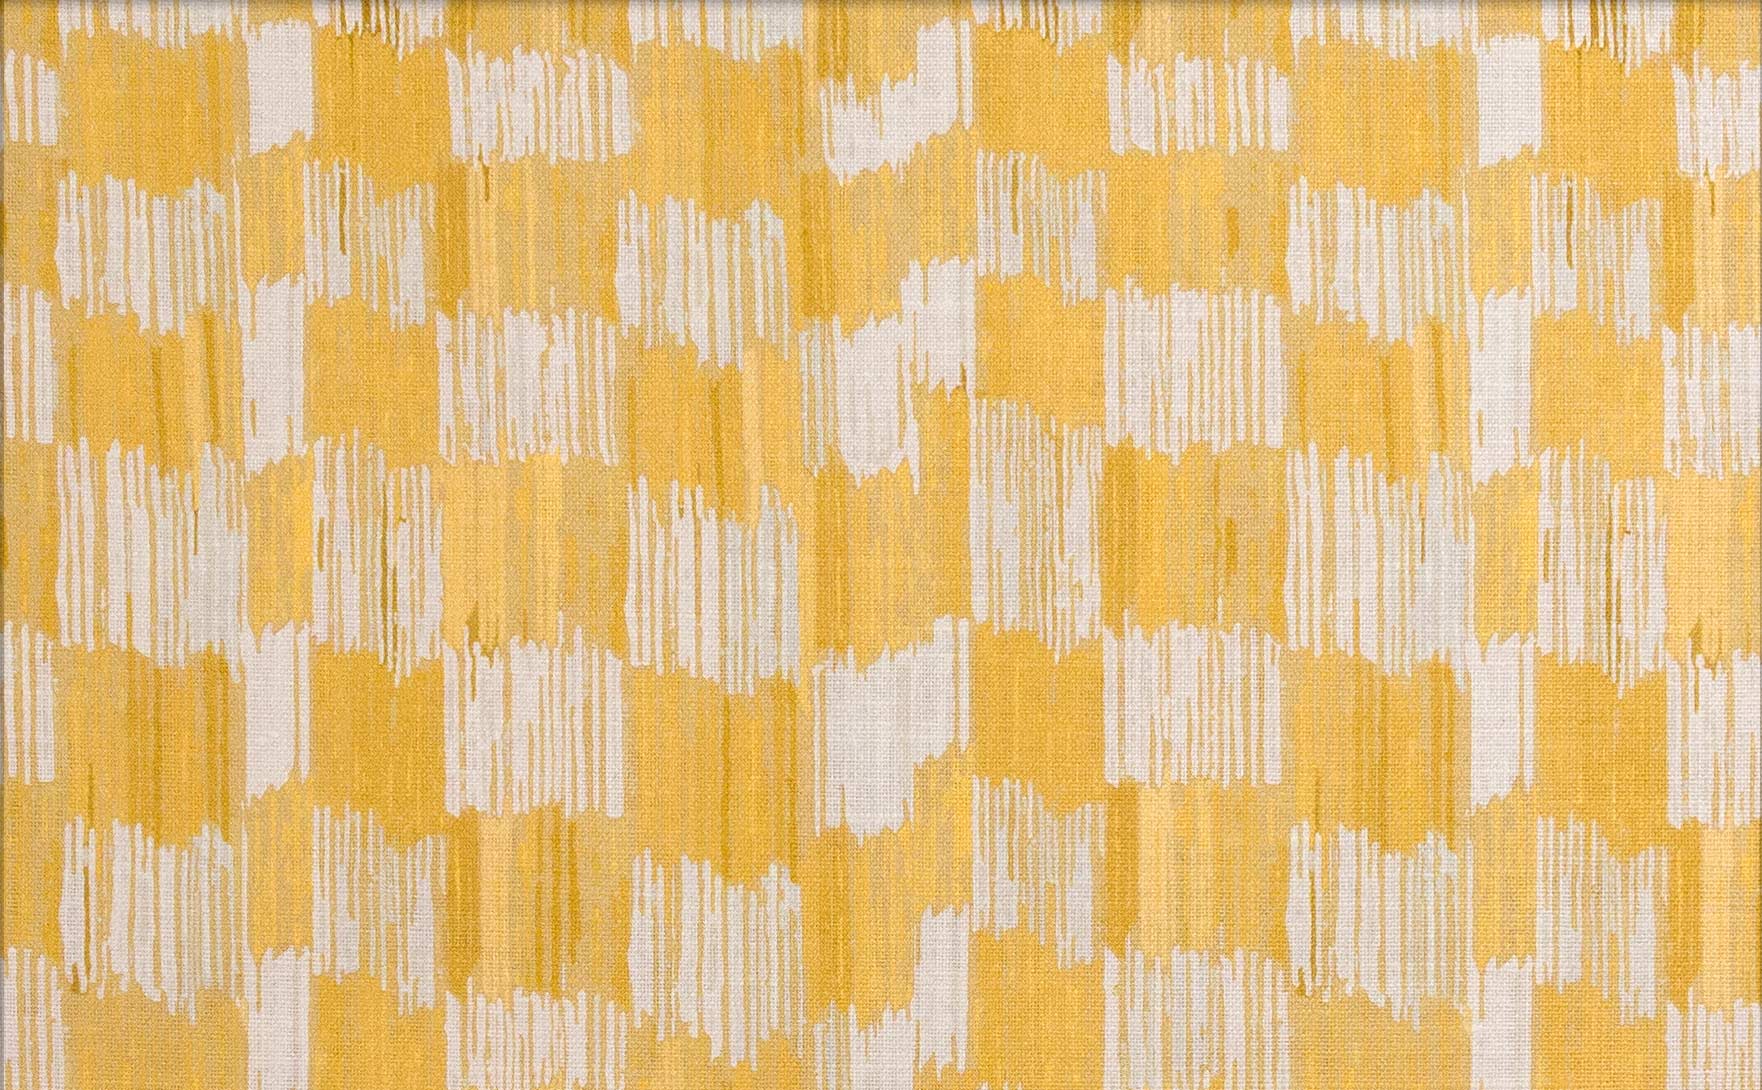 Detail of fabric in an abstract check print in shades of yellow and white.